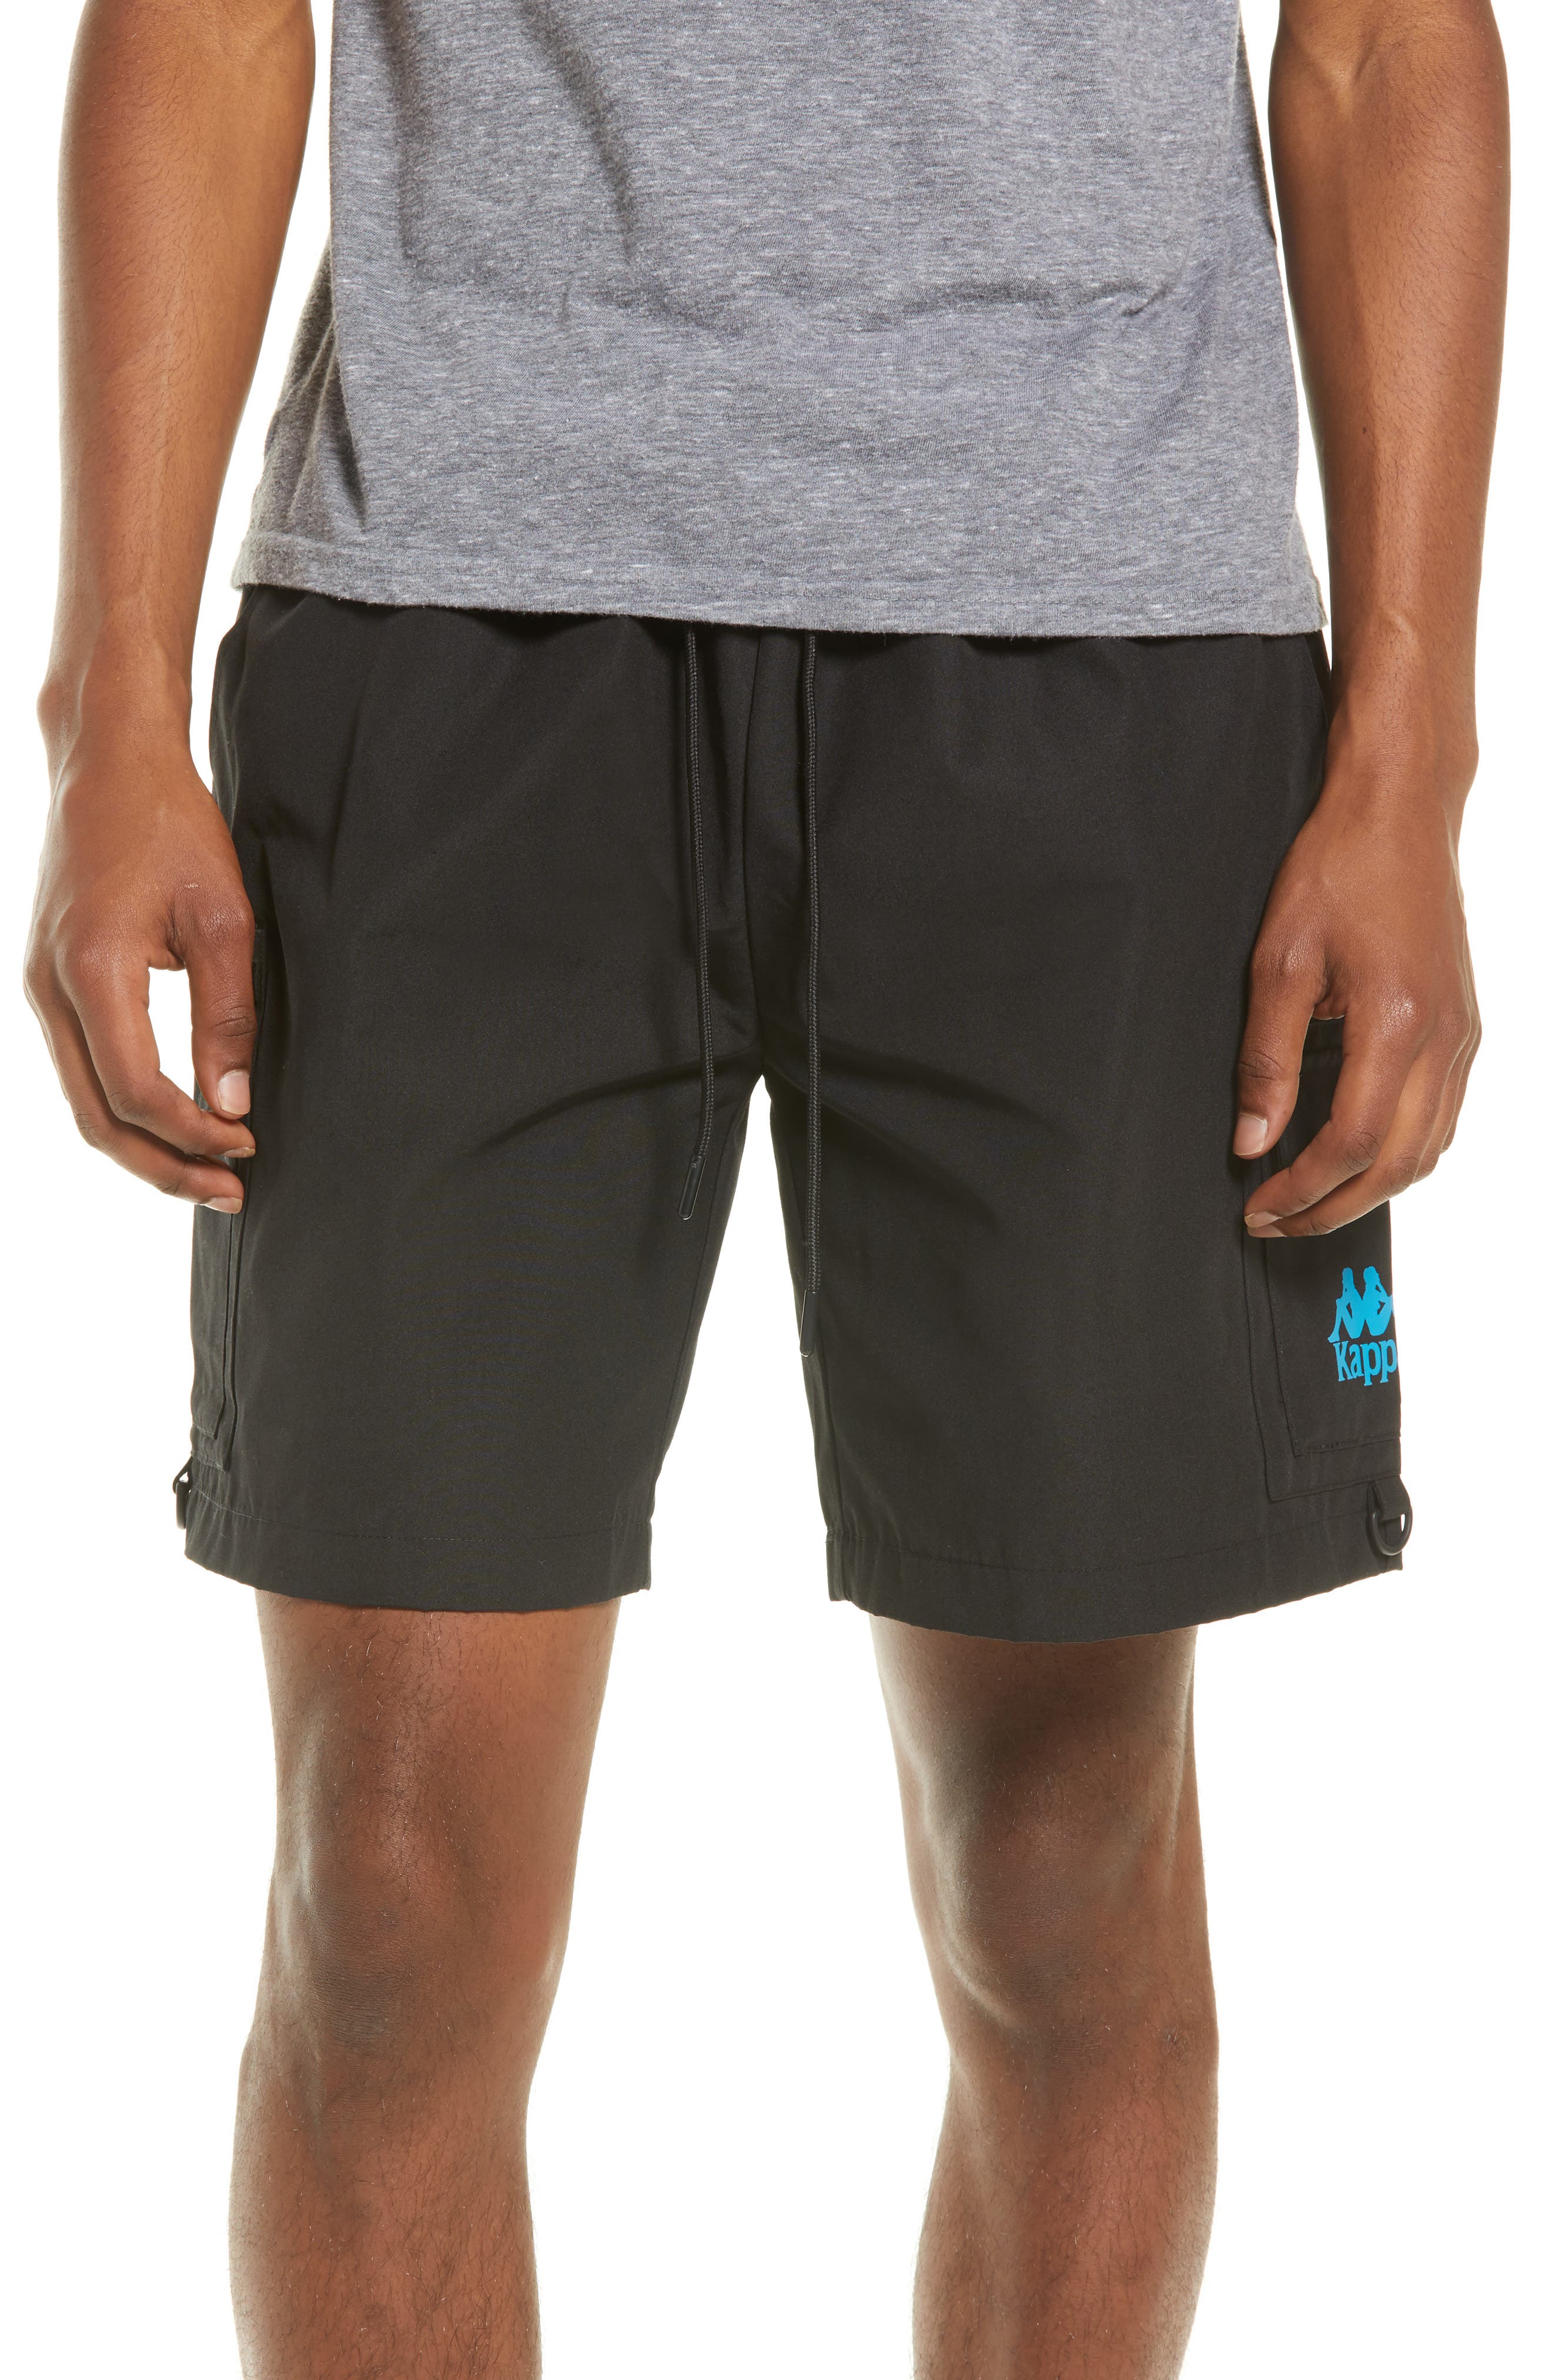 Kappa Men's Authentic Dalvey Cargo Shorts in Black-Blue at Nordstrom, Size X-Large